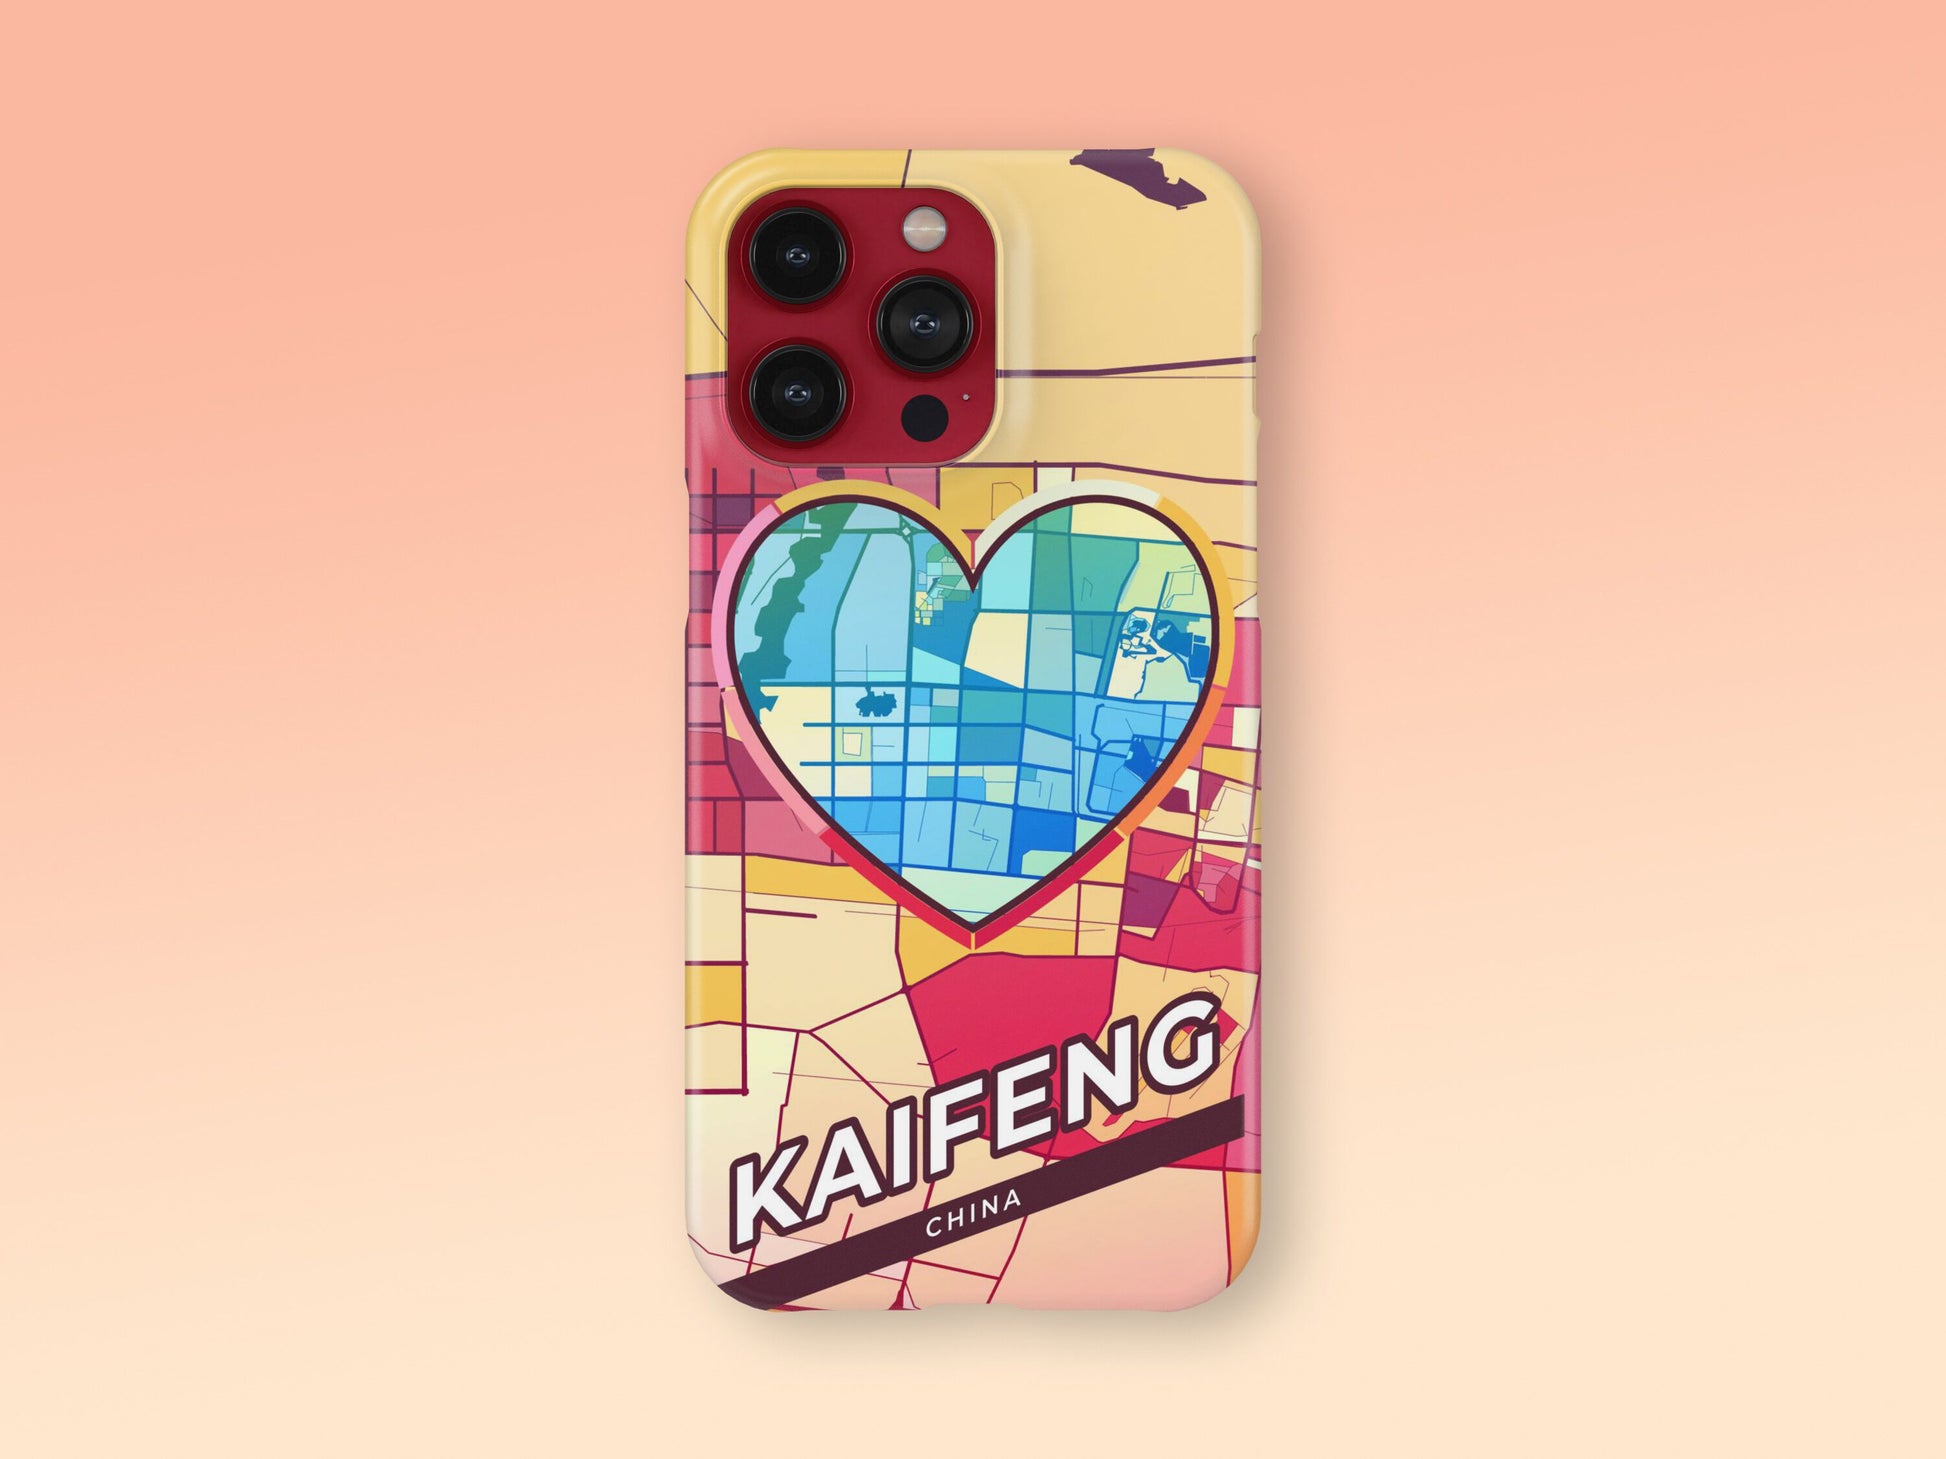 Kaifeng China slim phone case with colorful icon. Birthday, wedding or housewarming gift. Couple match cases. 2